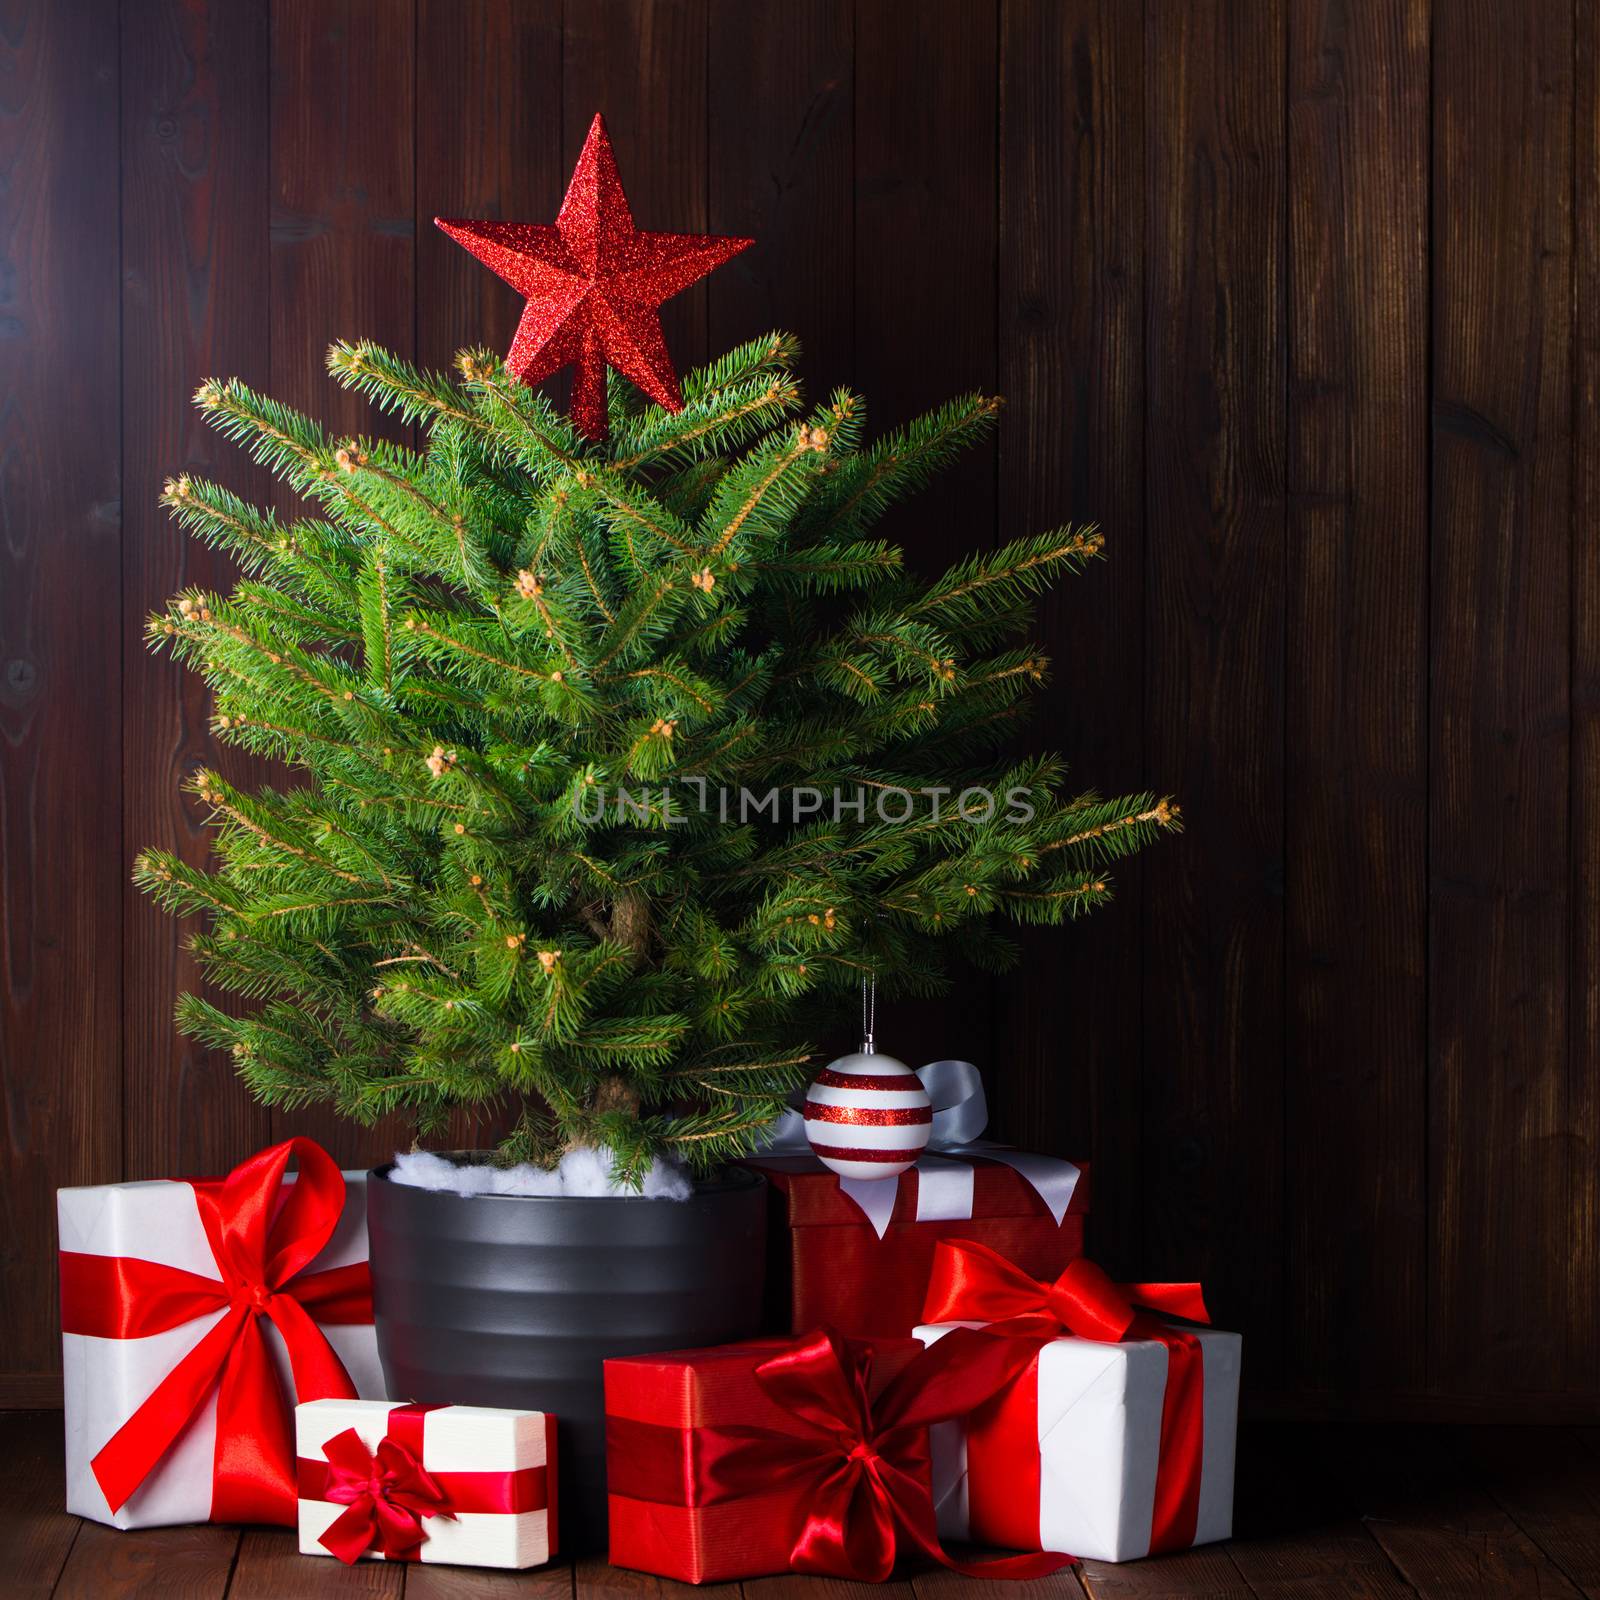 Merry christmas card with small christmas tree with star and gifts